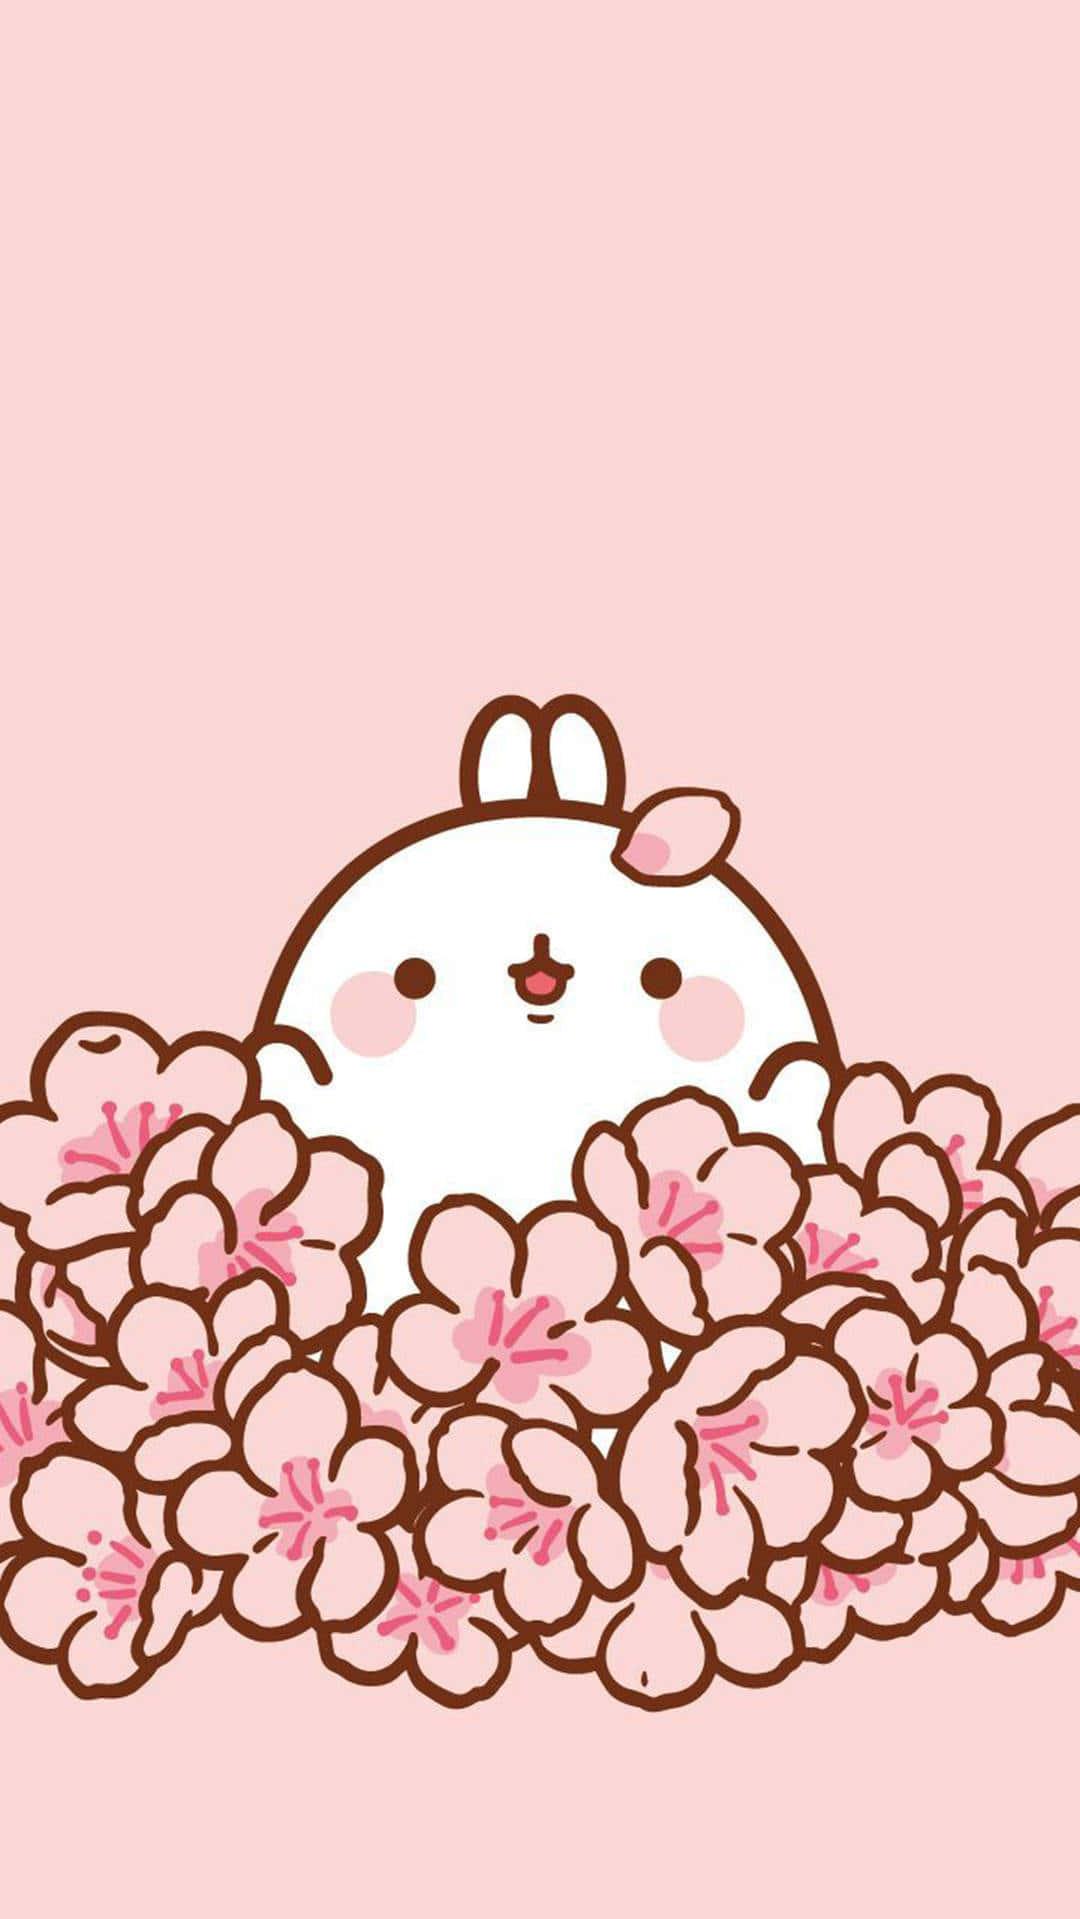 Download Cute Kawaii Molang With Flowers Wallpaper